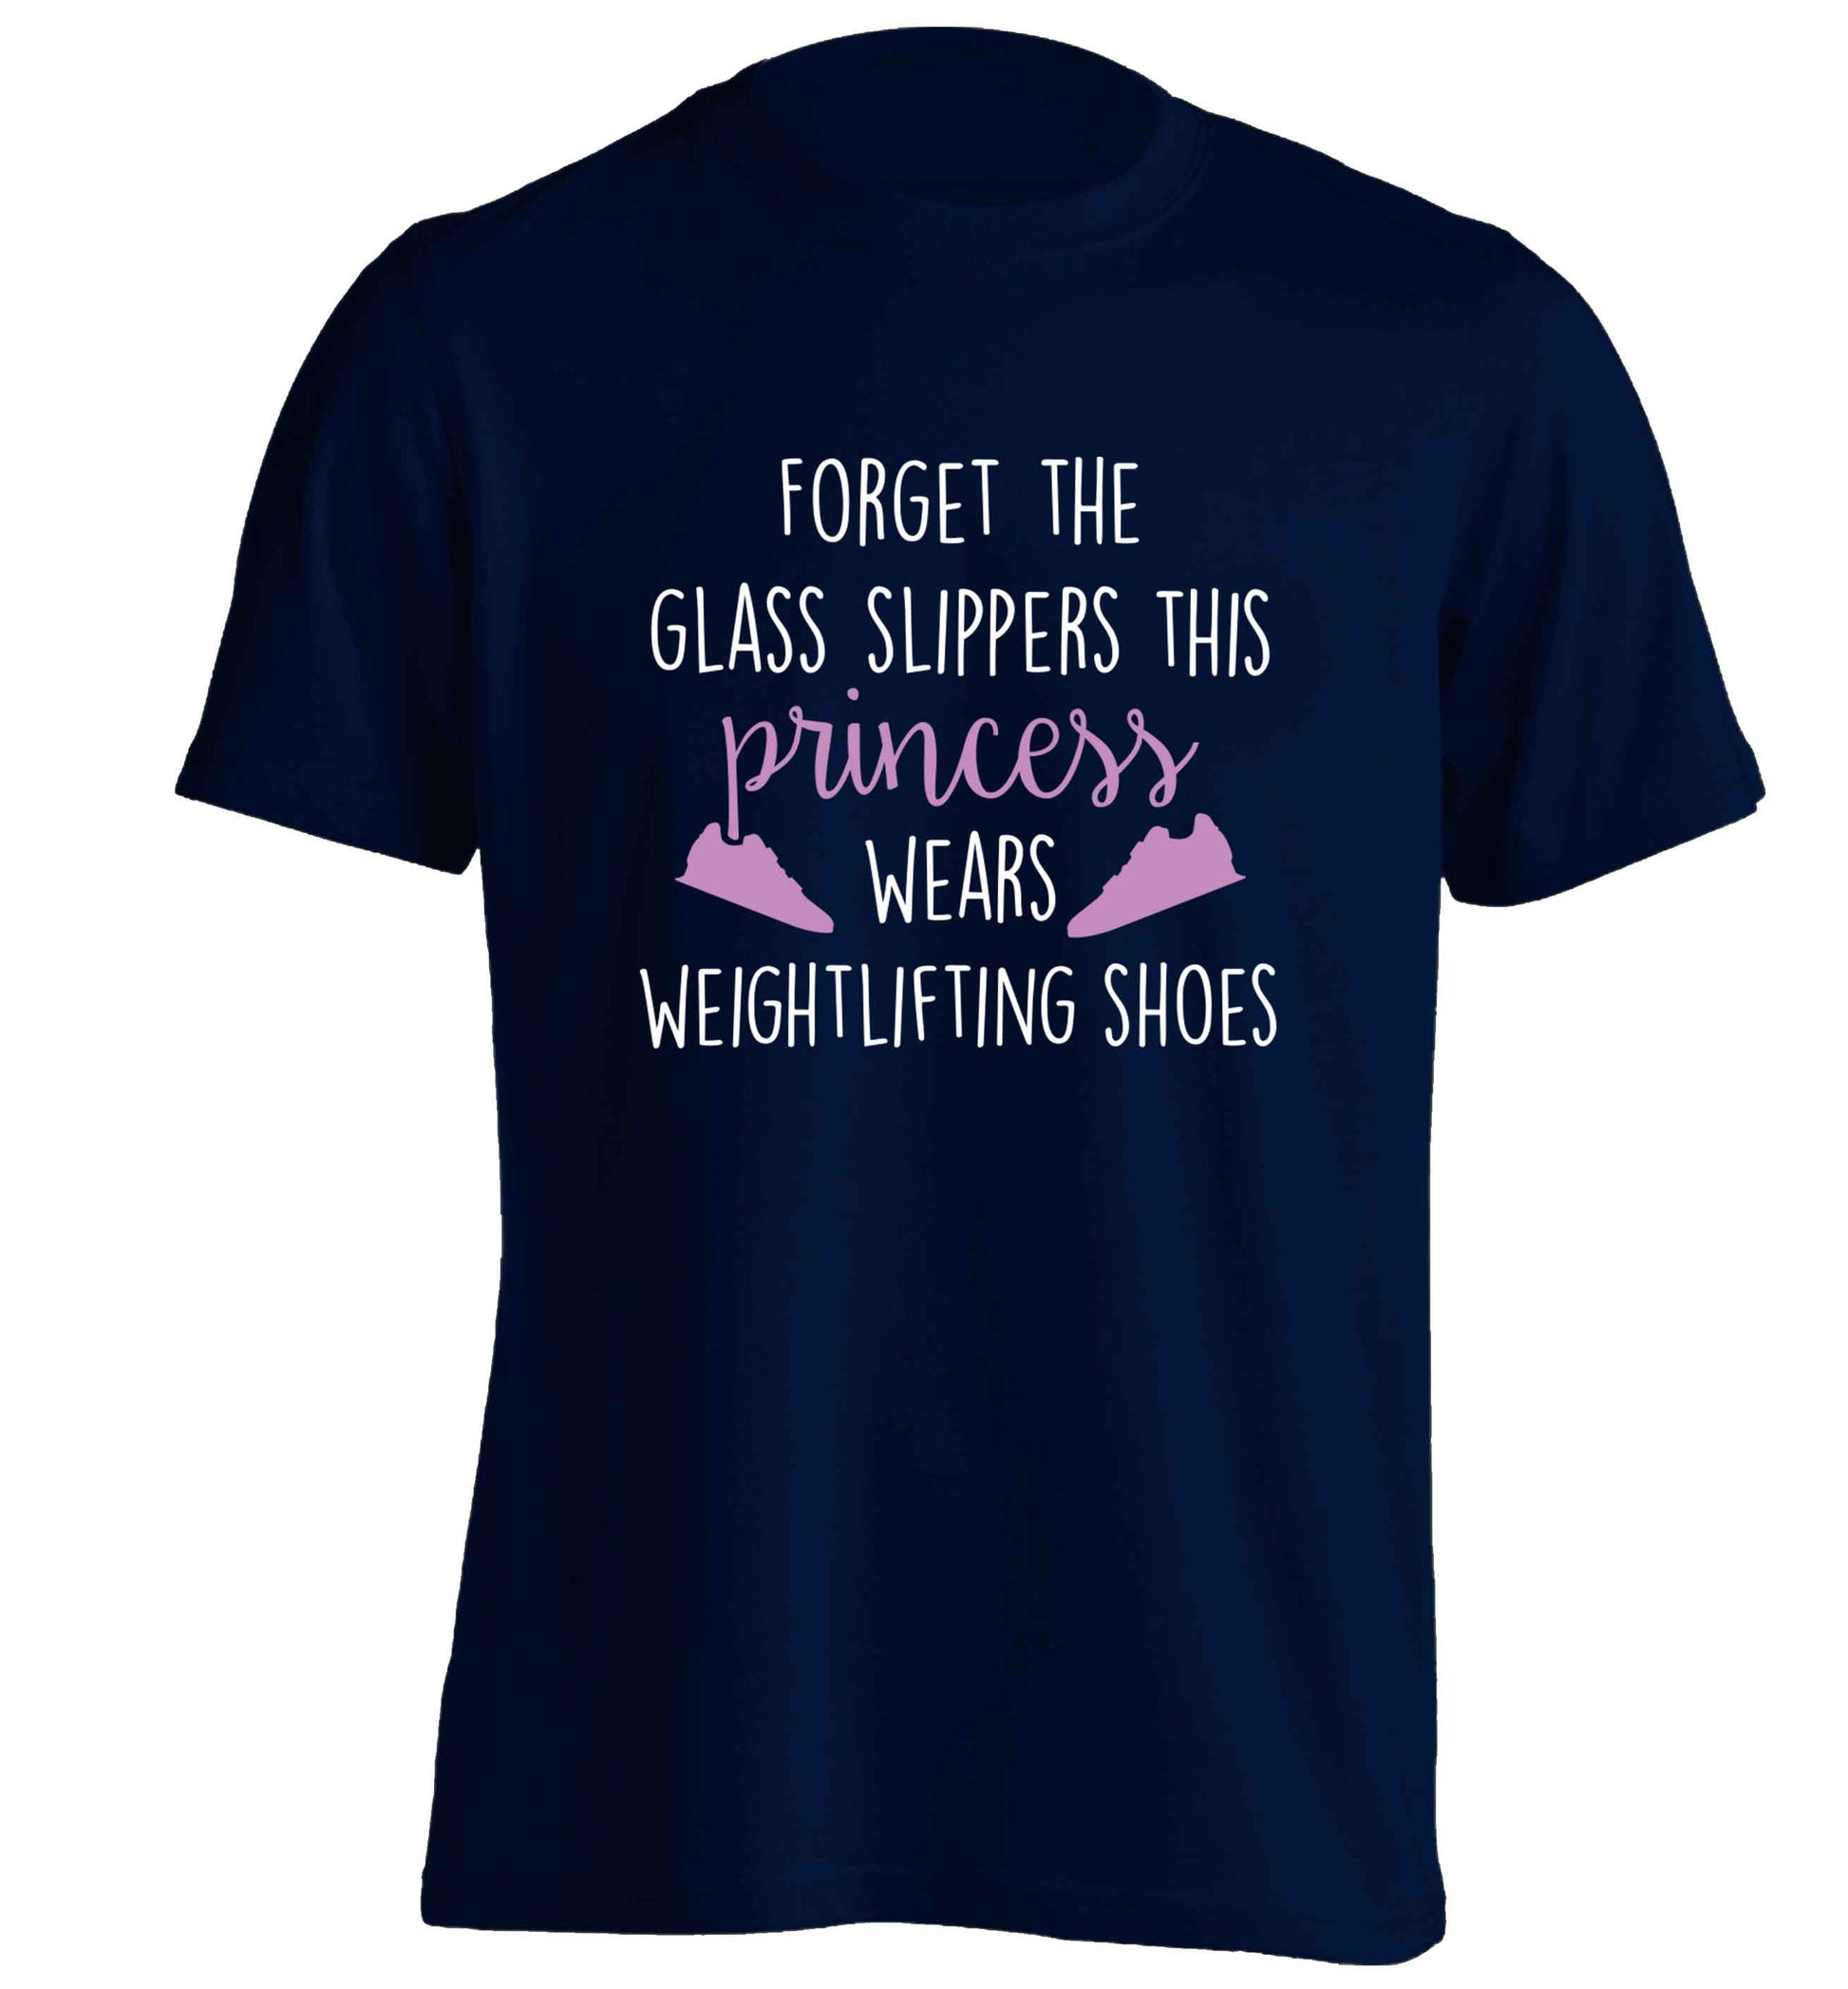 Forget the glass slippers this princess wears weightlifting shoes adults unisex navy Tshirt 2XL